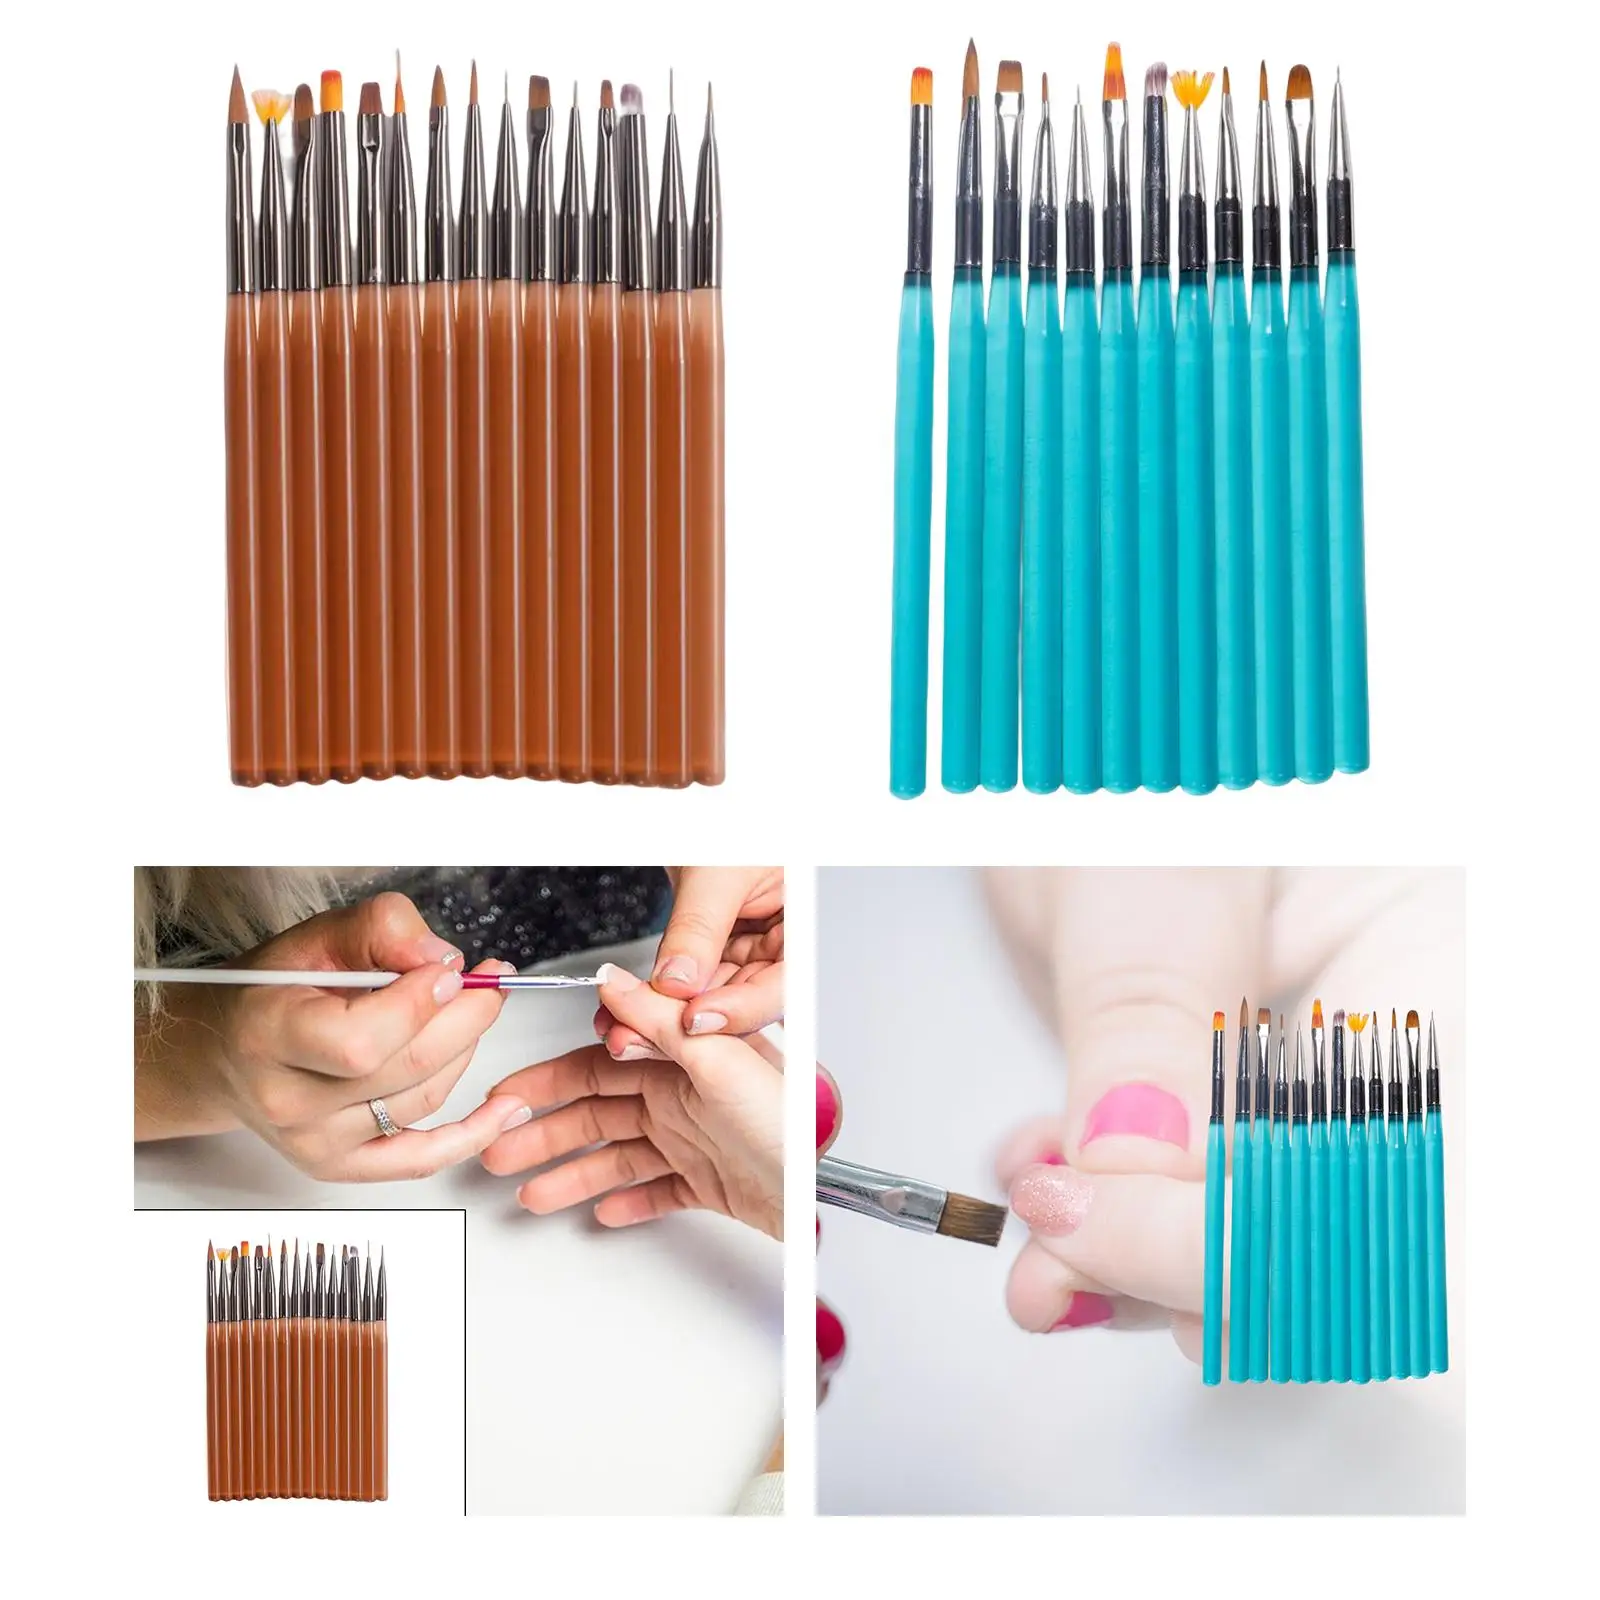 Nail Art Brushes Set for Women Nail Brushes Drawing Tools Nail Painting Brushes Nail Liner Brushes Lightweight for DIY Manicure